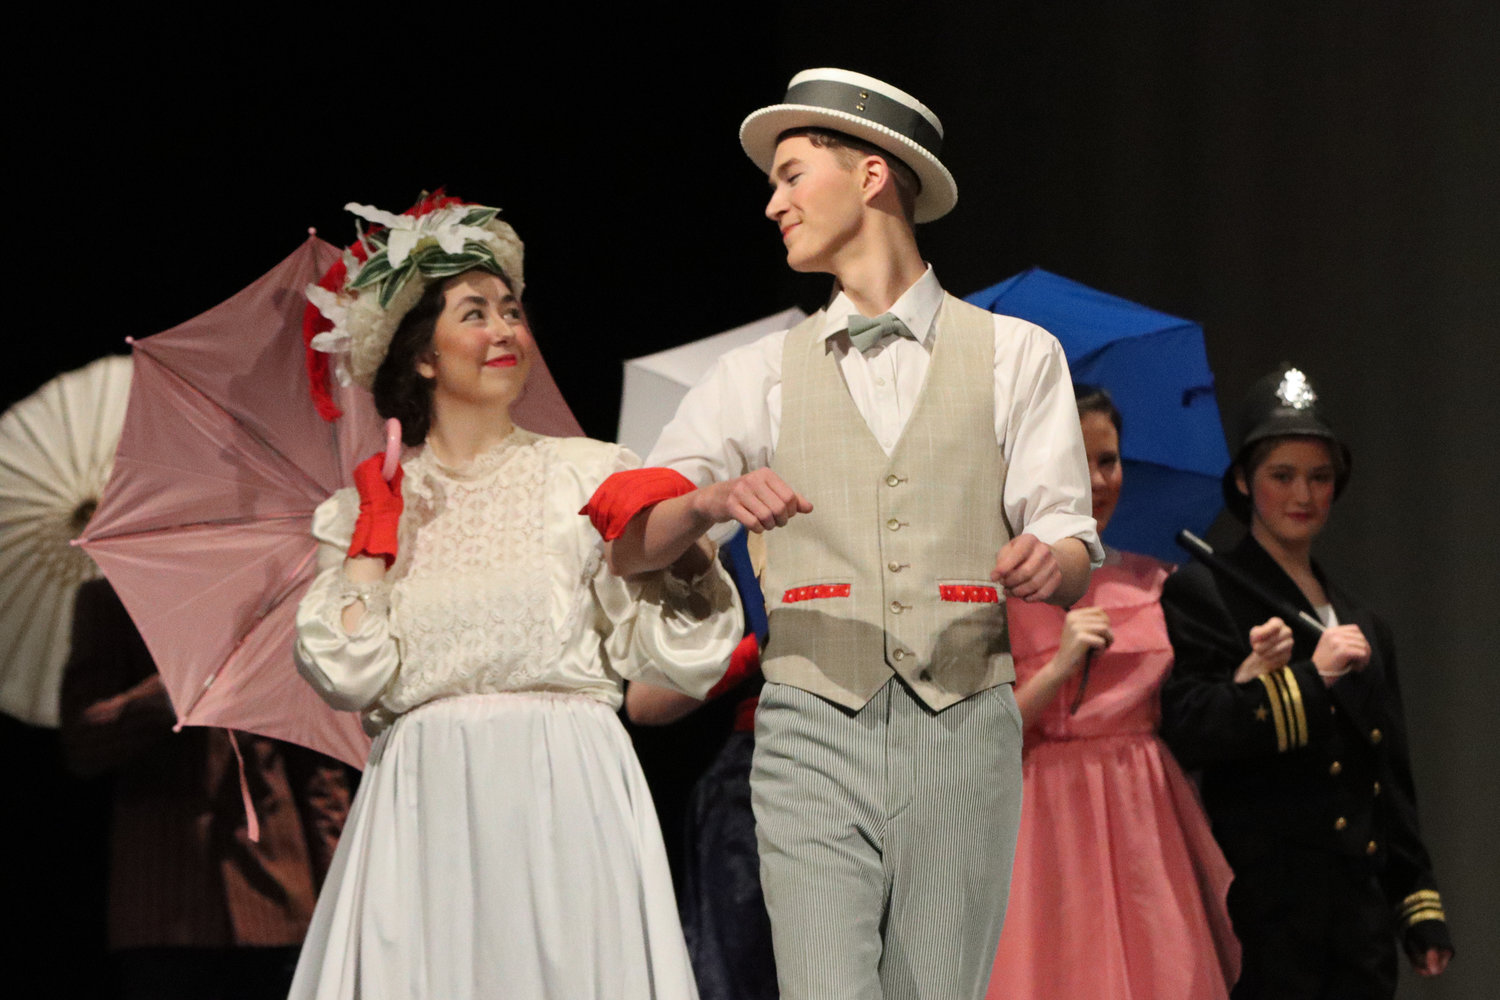 Hillcrest Academy students perform the spring musical, Mary Poppins, in Celebration Hall on Sunday, March 27